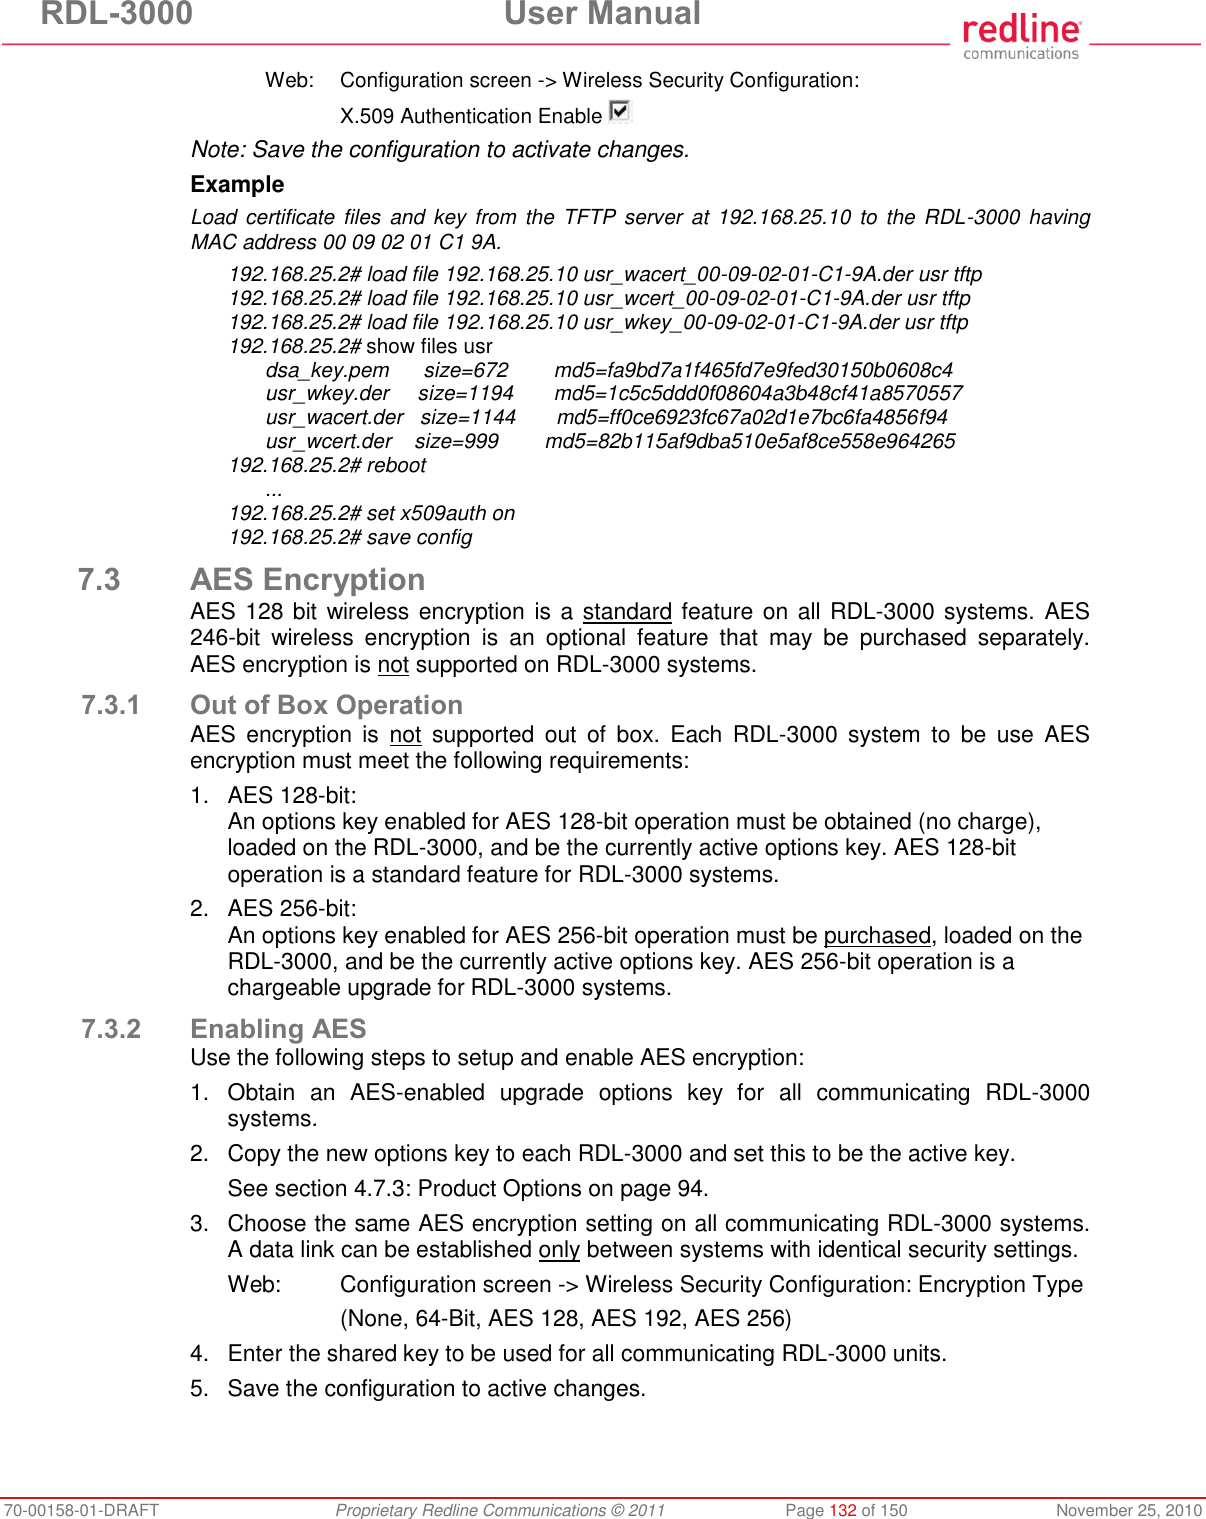 RDL-3000  User Manual 70-00158-01-DRAFT  Proprietary Redline Communications © 2011  Page 132 of 150  November 25, 2010   Web:  Configuration screen -&gt; Wireless Security Configuration:     X.509 Authentication Enable  Note: Save the configuration to activate changes. Example Load  certificate  files  and  key  from  the  TFTP  server  at 192.168.25.10  to  the  RDL-3000  having MAC address 00 09 02 01 C1 9A. 192.168.25.2# load file 192.168.25.10 usr_wacert_00-09-02-01-C1-9A.der usr tftp 192.168.25.2# load file 192.168.25.10 usr_wcert_00-09-02-01-C1-9A.der usr tftp 192.168.25.2# load file 192.168.25.10 usr_wkey_00-09-02-01-C1-9A.der usr tftp 192.168.25.2# show files usr   dsa_key.pem      size=672        md5=fa9bd7a1f465fd7e9fed30150b0608c4   usr_wkey.der     size=1194       md5=1c5c5ddd0f08604a3b48cf41a8570557   usr_wacert.der   size=1144       md5=ff0ce6923fc67a02d1e7bc6fa4856f94   usr_wcert.der    size=999        md5=82b115af9dba510e5af8ce558e964265 192.168.25.2# reboot  ... 192.168.25.2# set x509auth on 192.168.25.2# save config 7.3 AES Encryption AES 128 bit  wireless encryption is a standard feature on all RDL-3000 systems. AES 246-bit  wireless  encryption  is  an  optional  feature  that  may  be  purchased  separately. AES encryption is not supported on RDL-3000 systems. 7.3.1 Out of Box Operation AES  encryption  is  not  supported  out  of  box.  Each  RDL-3000  system  to  be  use  AES encryption must meet the following requirements: 1.  AES 128-bit: An options key enabled for AES 128-bit operation must be obtained (no charge), loaded on the RDL-3000, and be the currently active options key. AES 128-bit operation is a standard feature for RDL-3000 systems. 2. AES 256-bit: An options key enabled for AES 256-bit operation must be purchased, loaded on the RDL-3000, and be the currently active options key. AES 256-bit operation is a chargeable upgrade for RDL-3000 systems. 7.3.2 Enabling AES Use the following steps to setup and enable AES encryption: 1.  Obtain  an  AES-enabled  upgrade  options  key  for  all  communicating  RDL-3000 systems. 2.  Copy the new options key to each RDL-3000 and set this to be the active key. See section 4.7.3: Product Options on page 94. 3.  Choose the same AES encryption setting on all communicating RDL-3000 systems. A data link can be established only between systems with identical security settings. Web:  Configuration screen -&gt; Wireless Security Configuration: Encryption Type     (None, 64-Bit, AES 128, AES 192, AES 256) 4.  Enter the shared key to be used for all communicating RDL-3000 units. 5.  Save the configuration to active changes. 